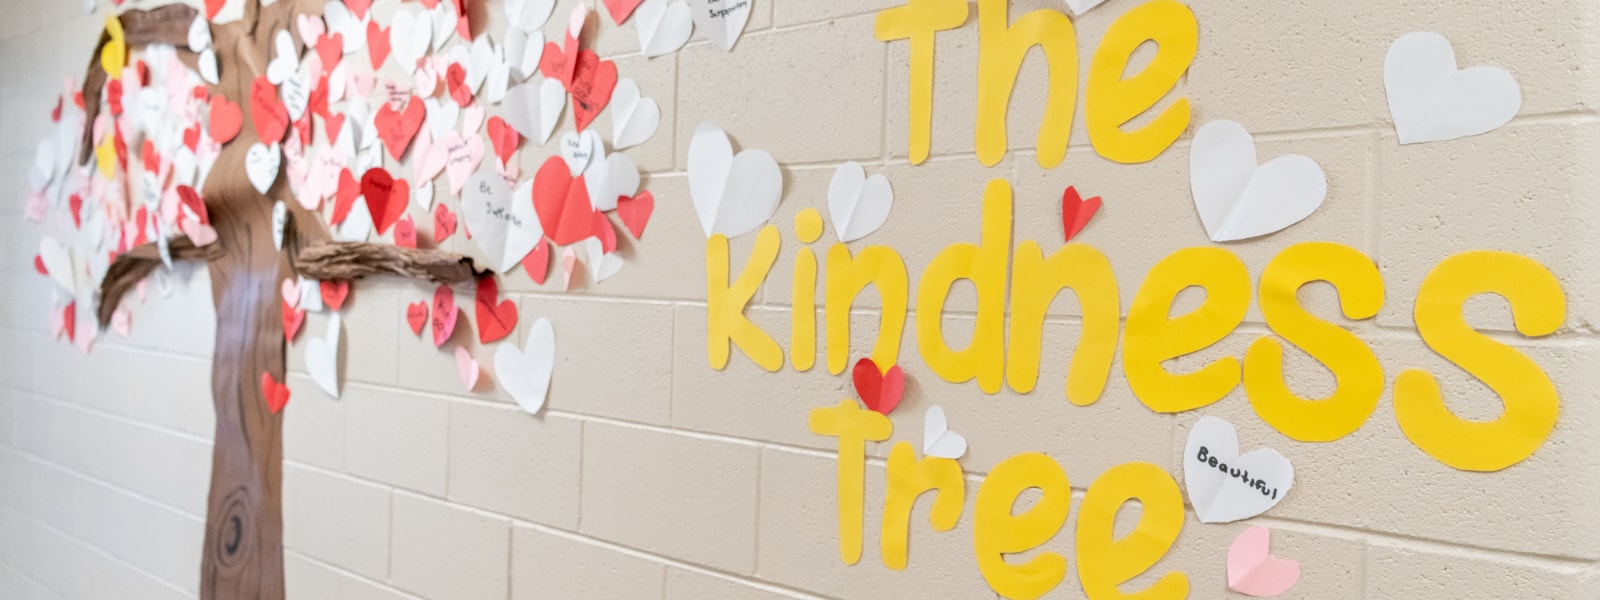 letters on a wall spelling out the kindness tree